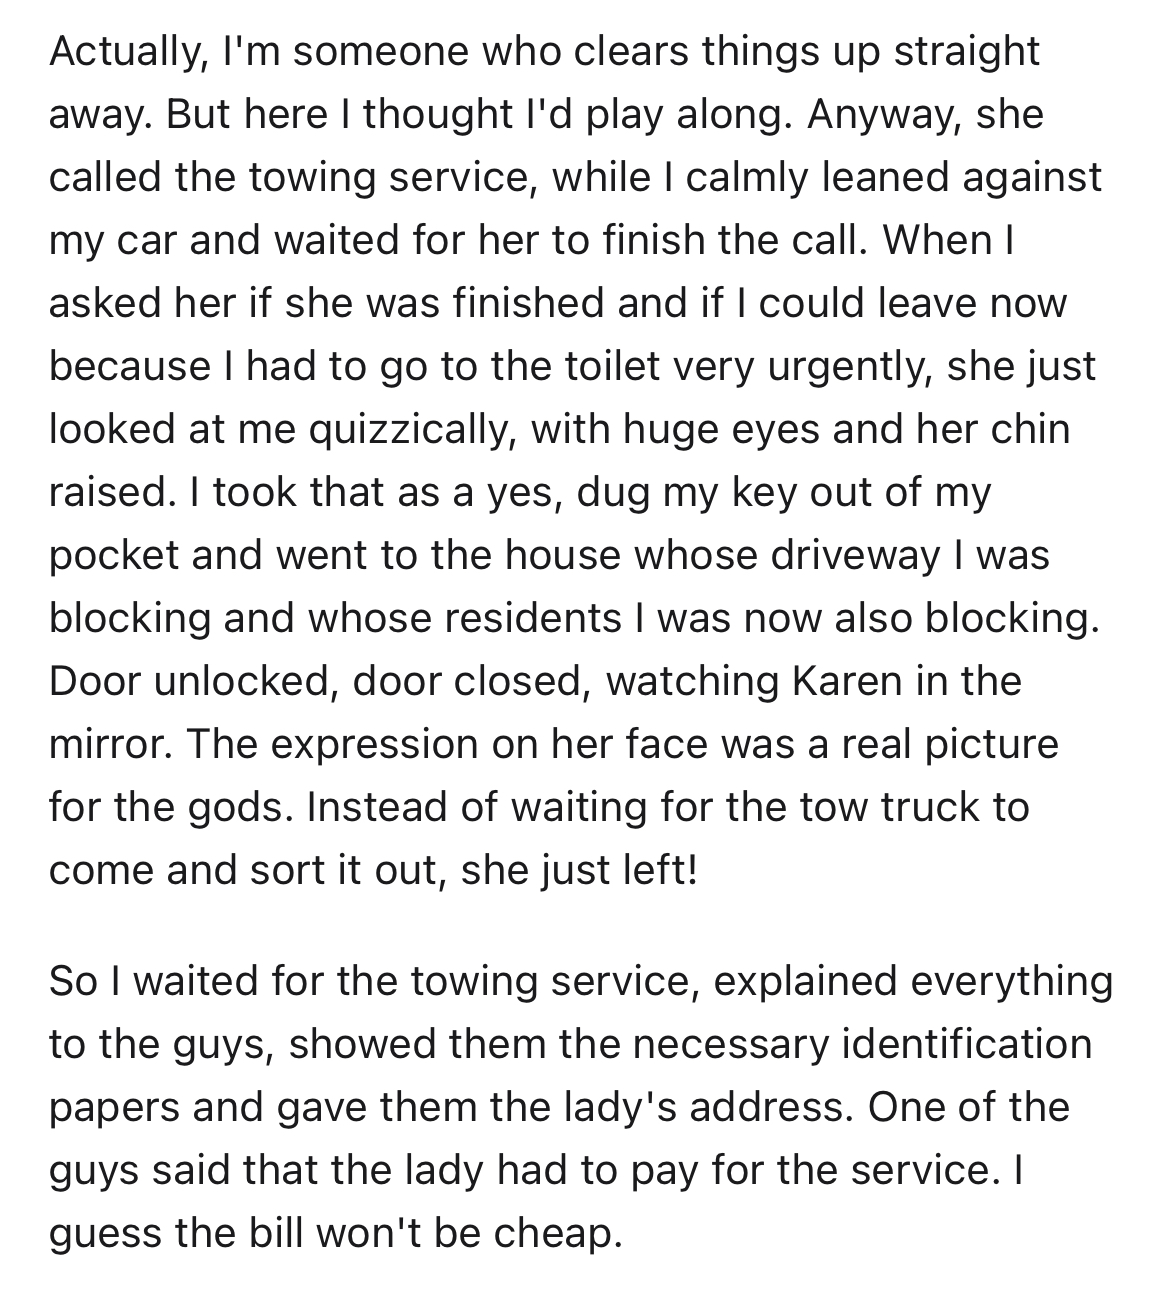 Karen stuck with bill after calling tow truck - document - Actually, I'm someone who clears things up straight away. But here I thought I'd play along. Anyway, she called the towing service, while I calmly leaned against my car and waited for her to finis